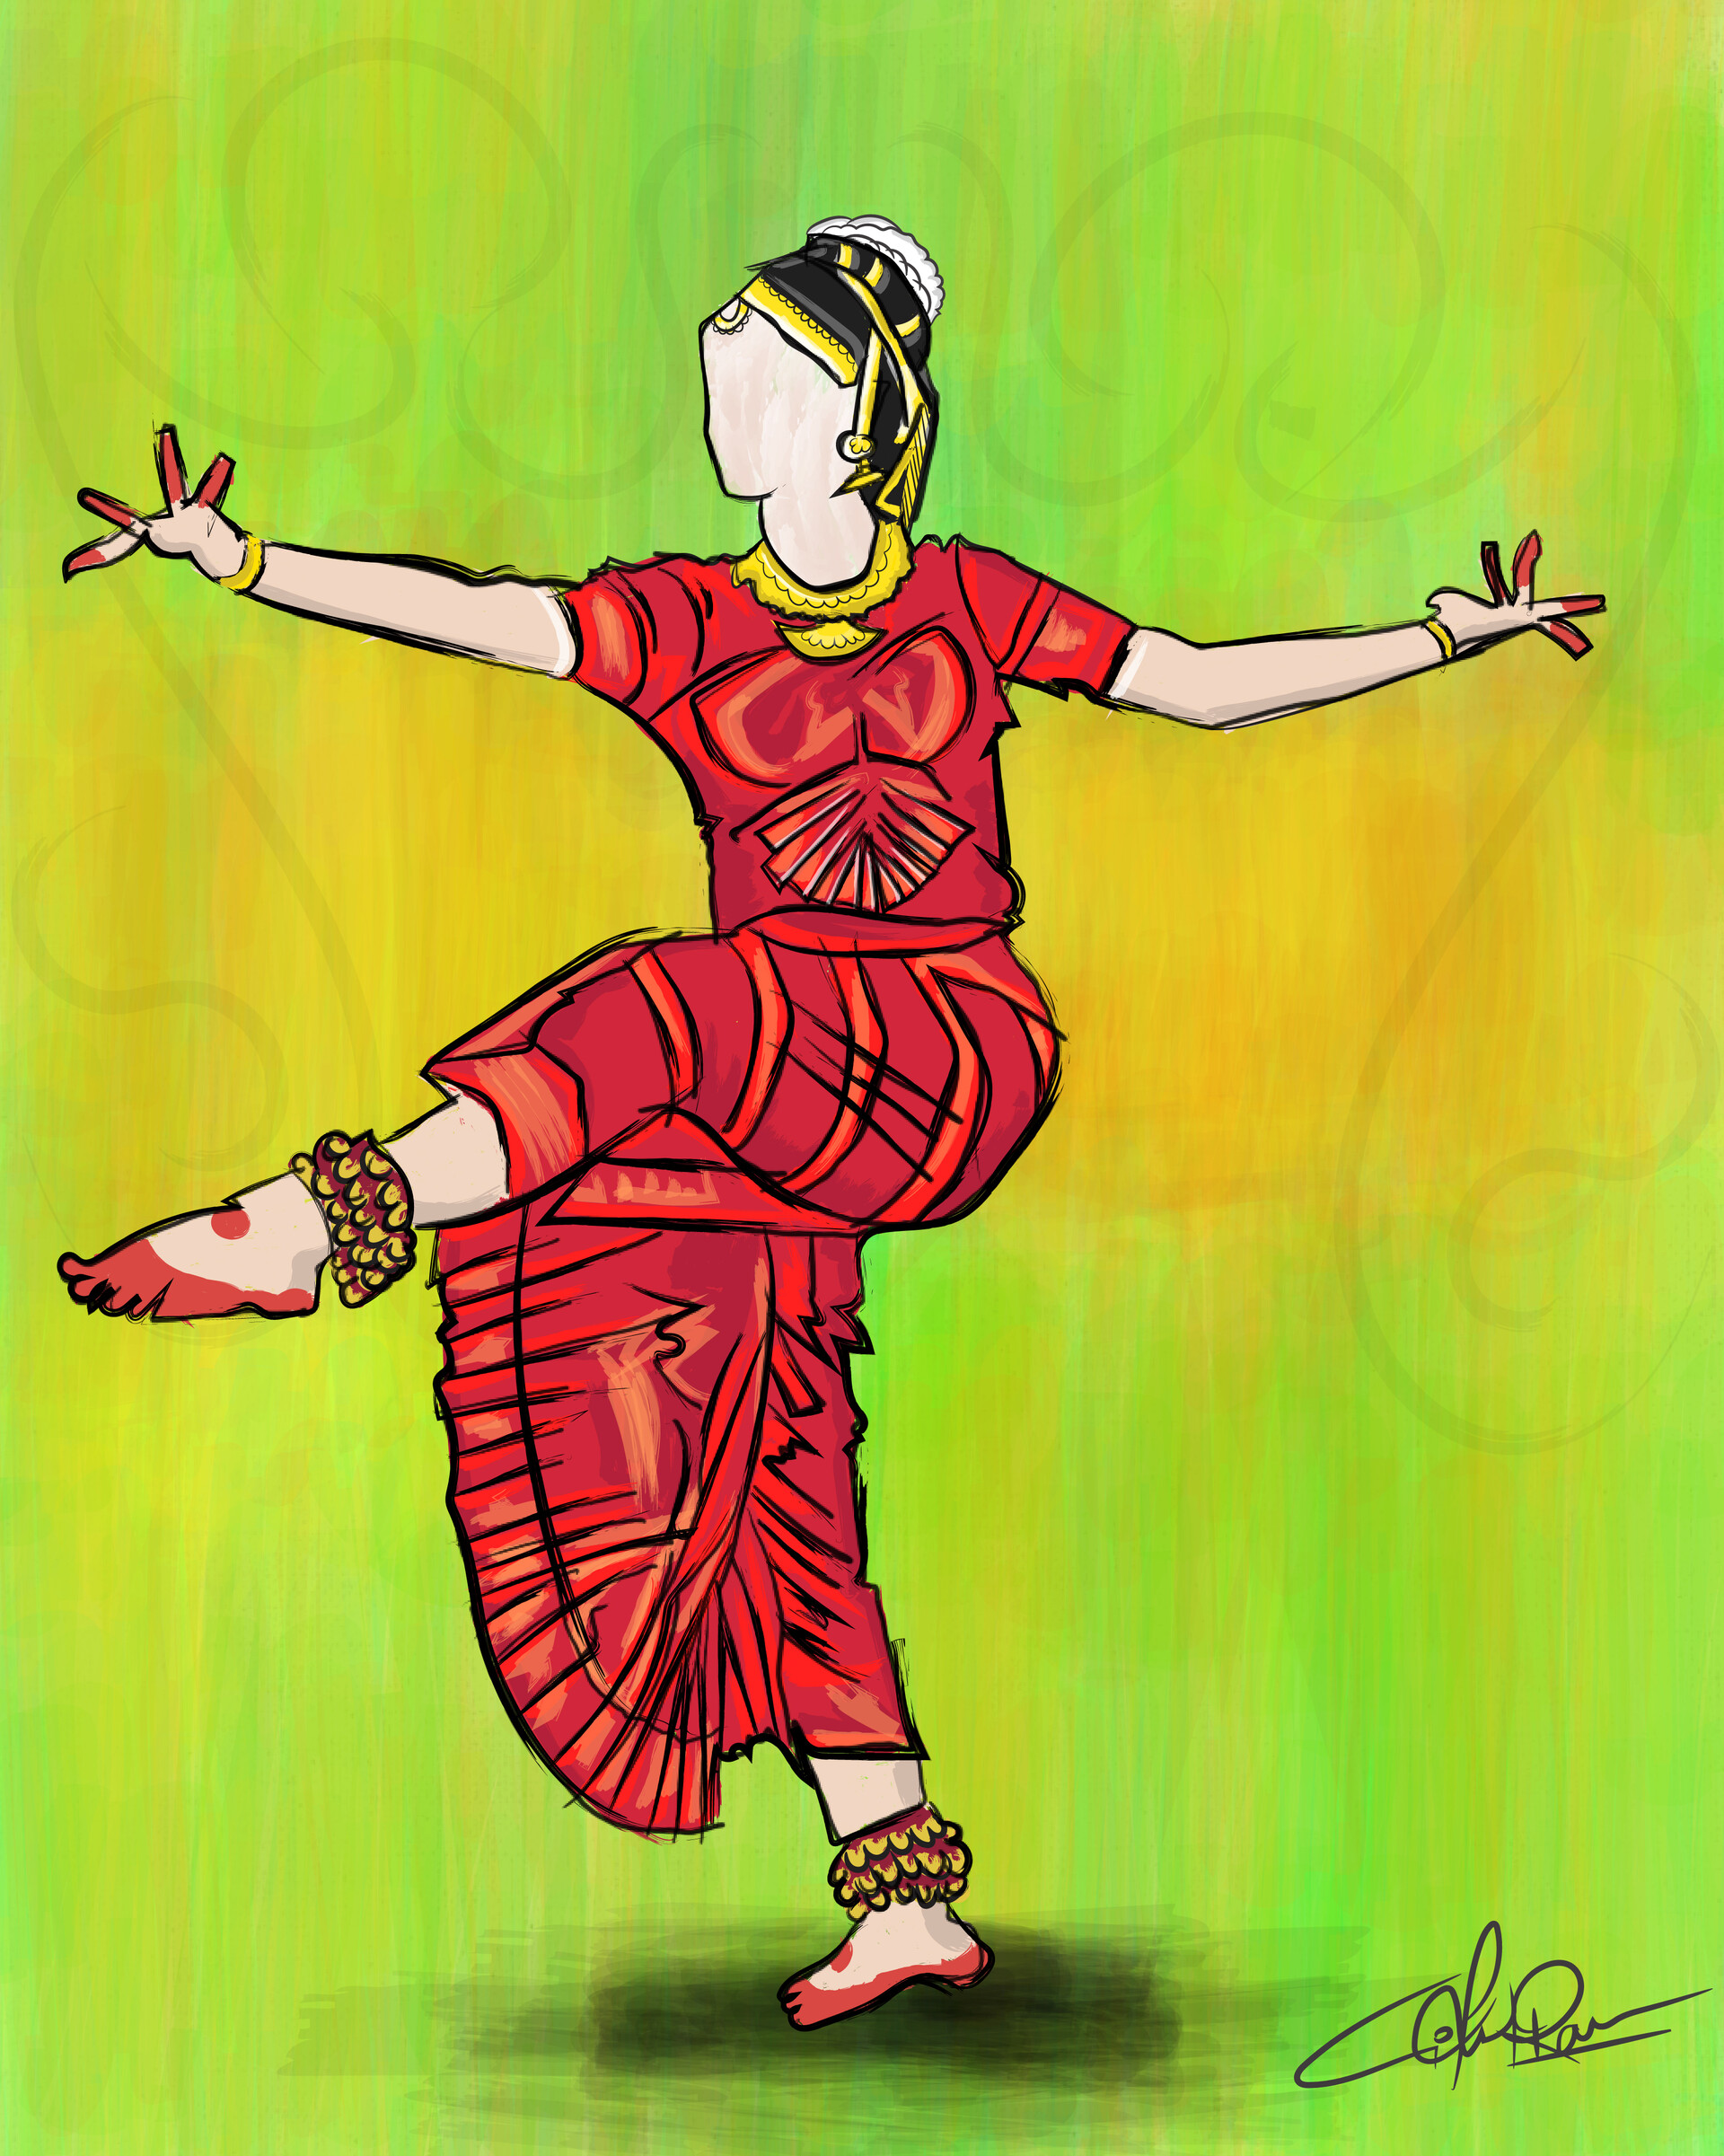 Classical Dance from Bangalore, India - Urban Sketchers